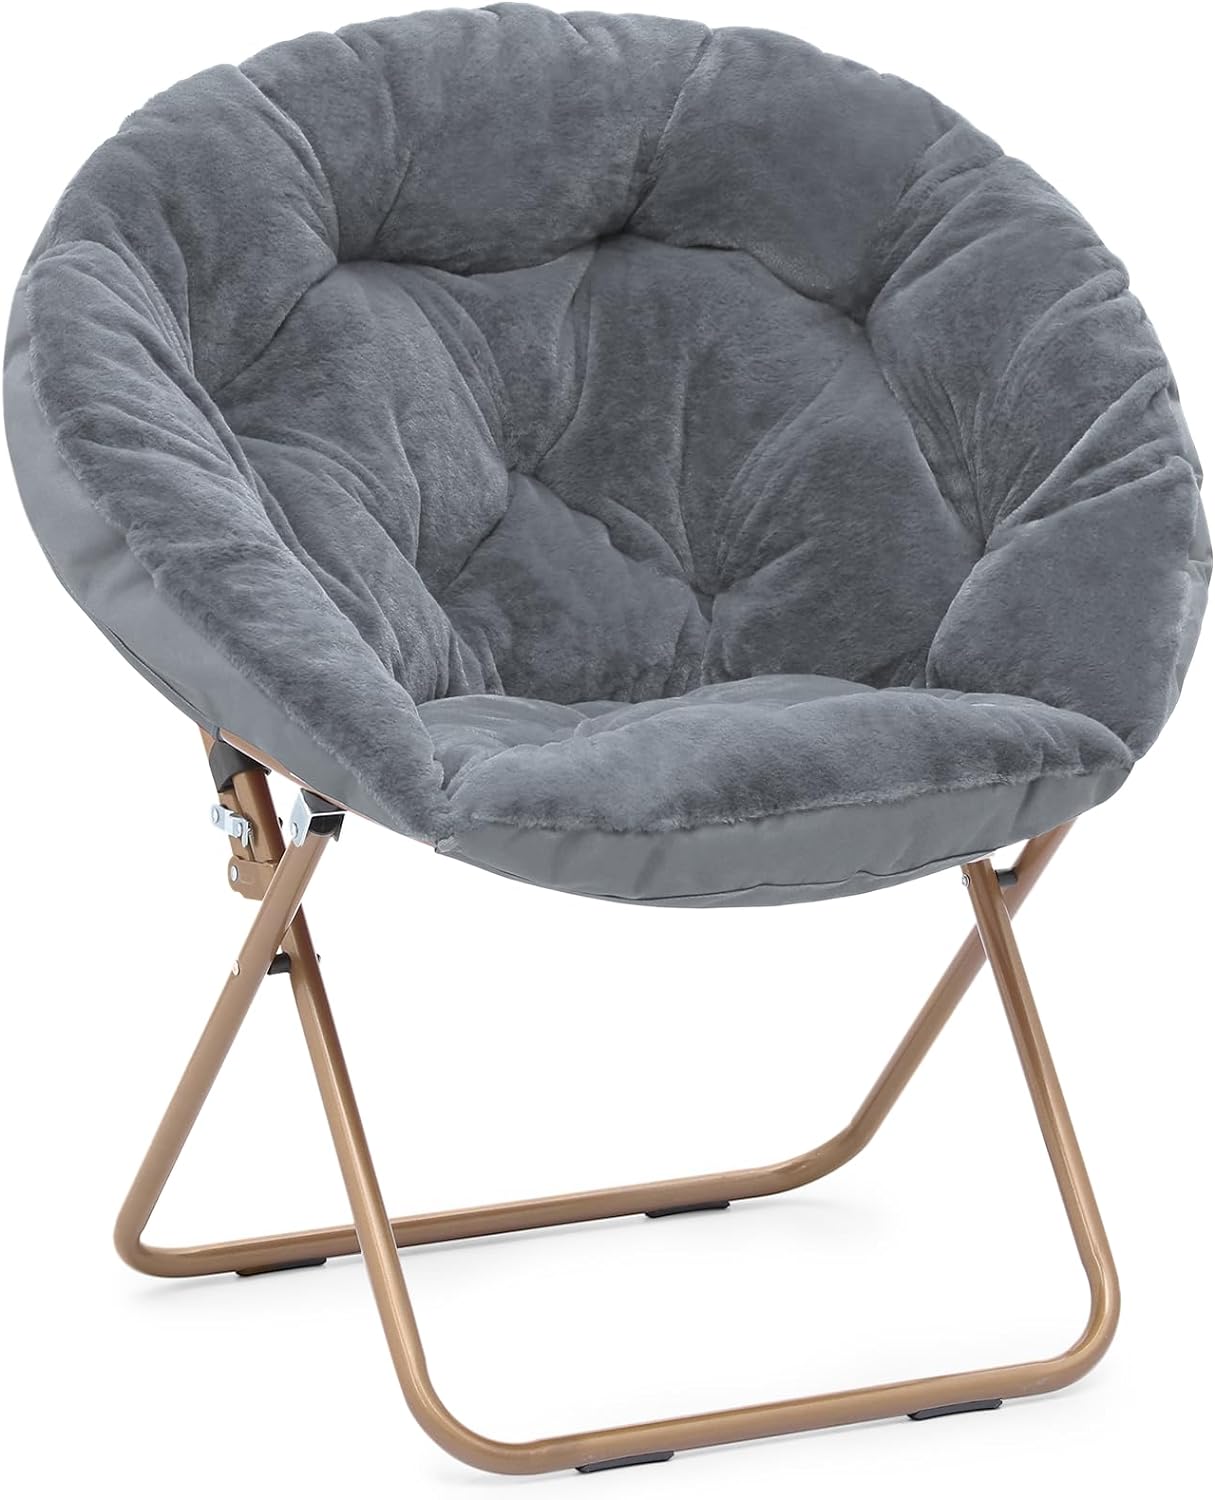 MoNiBloom Round Folding Faux Fur Saucer Chair Foldable Metal Frame (Gray) - $40